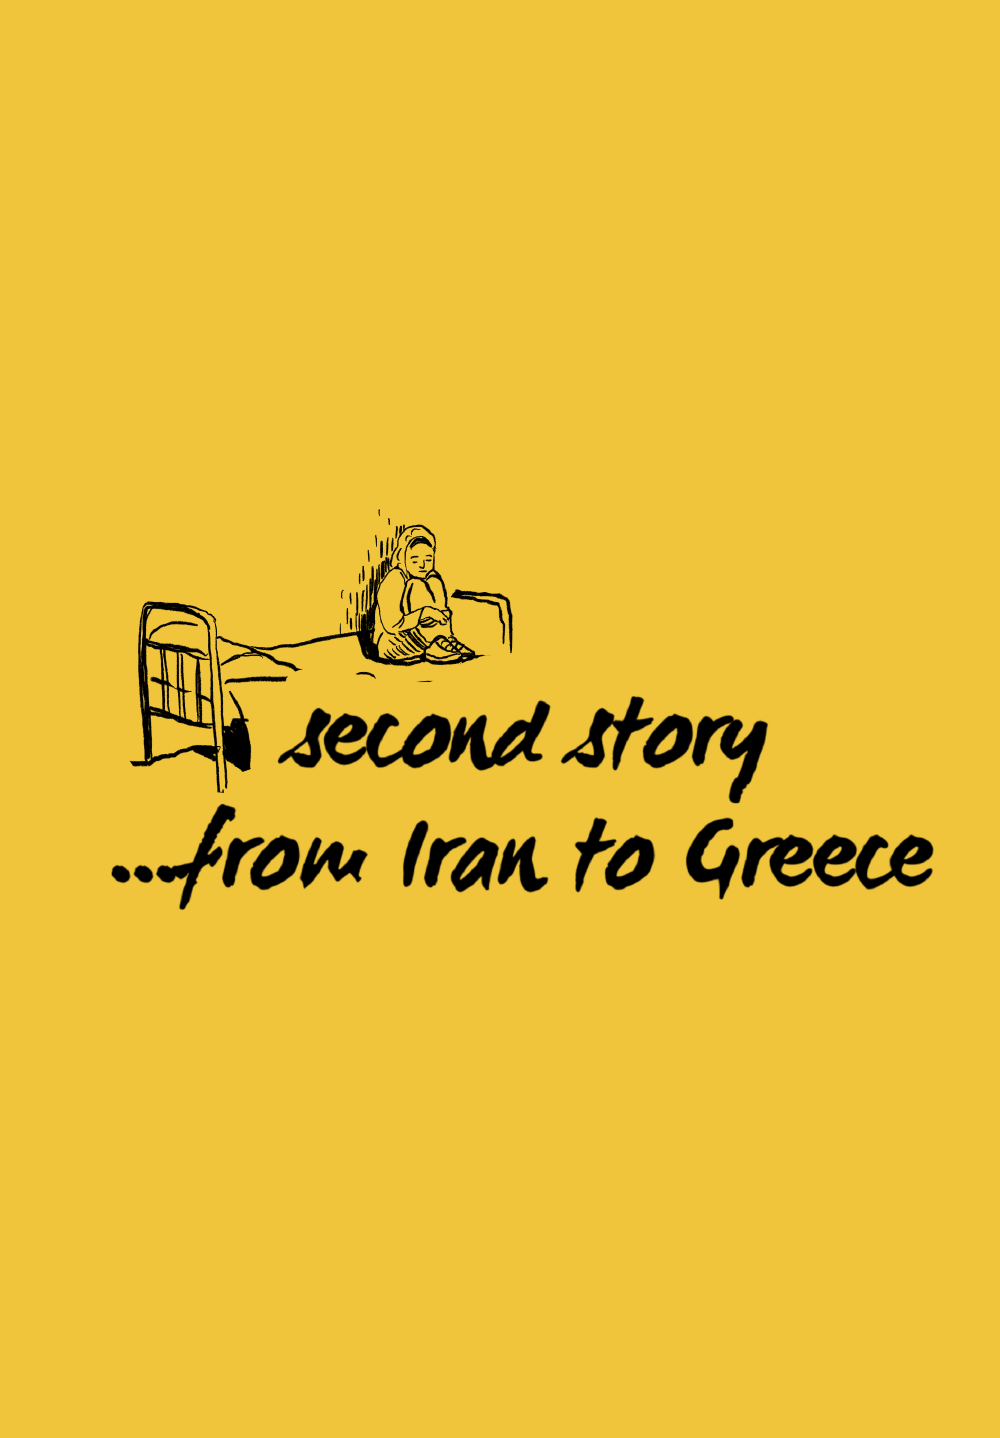 Counter stories: Second story ... from Iran to Greece page 001